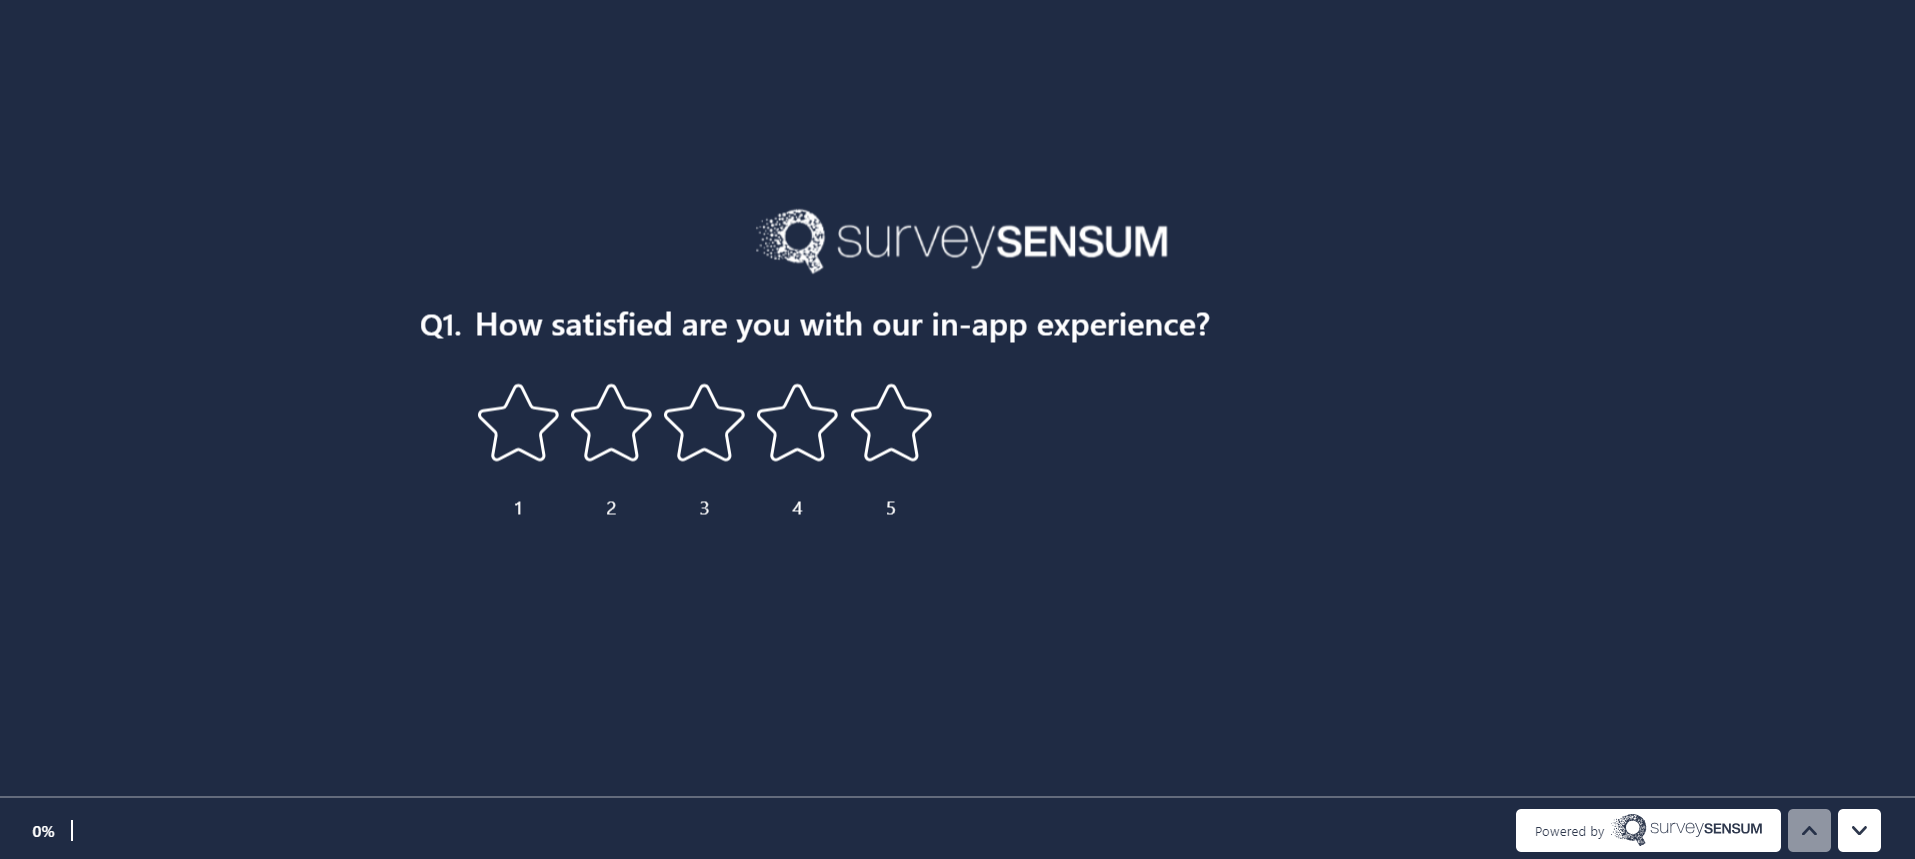 This is the image of a survey with Rating survey type.